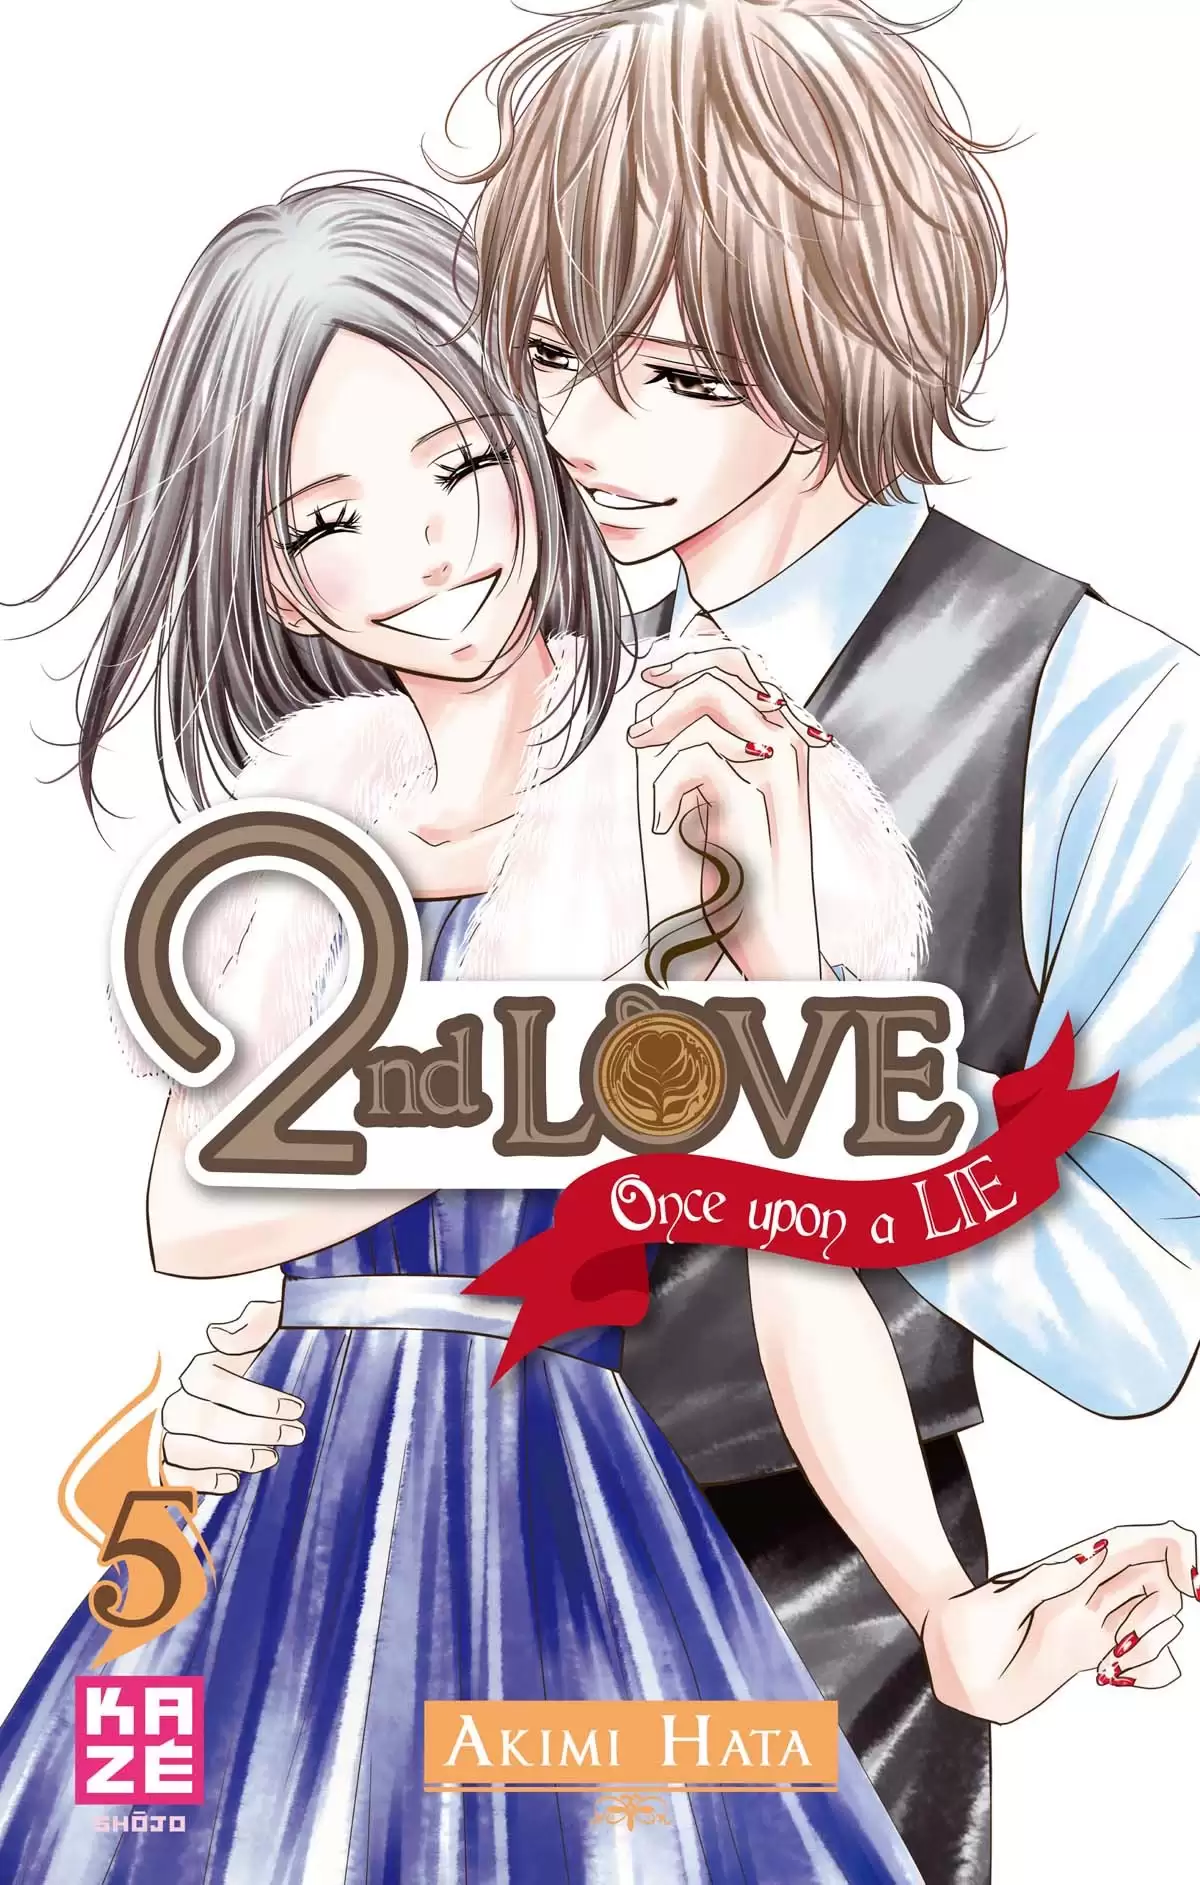 2nd love – Once upon a lie Volume 5 page 1